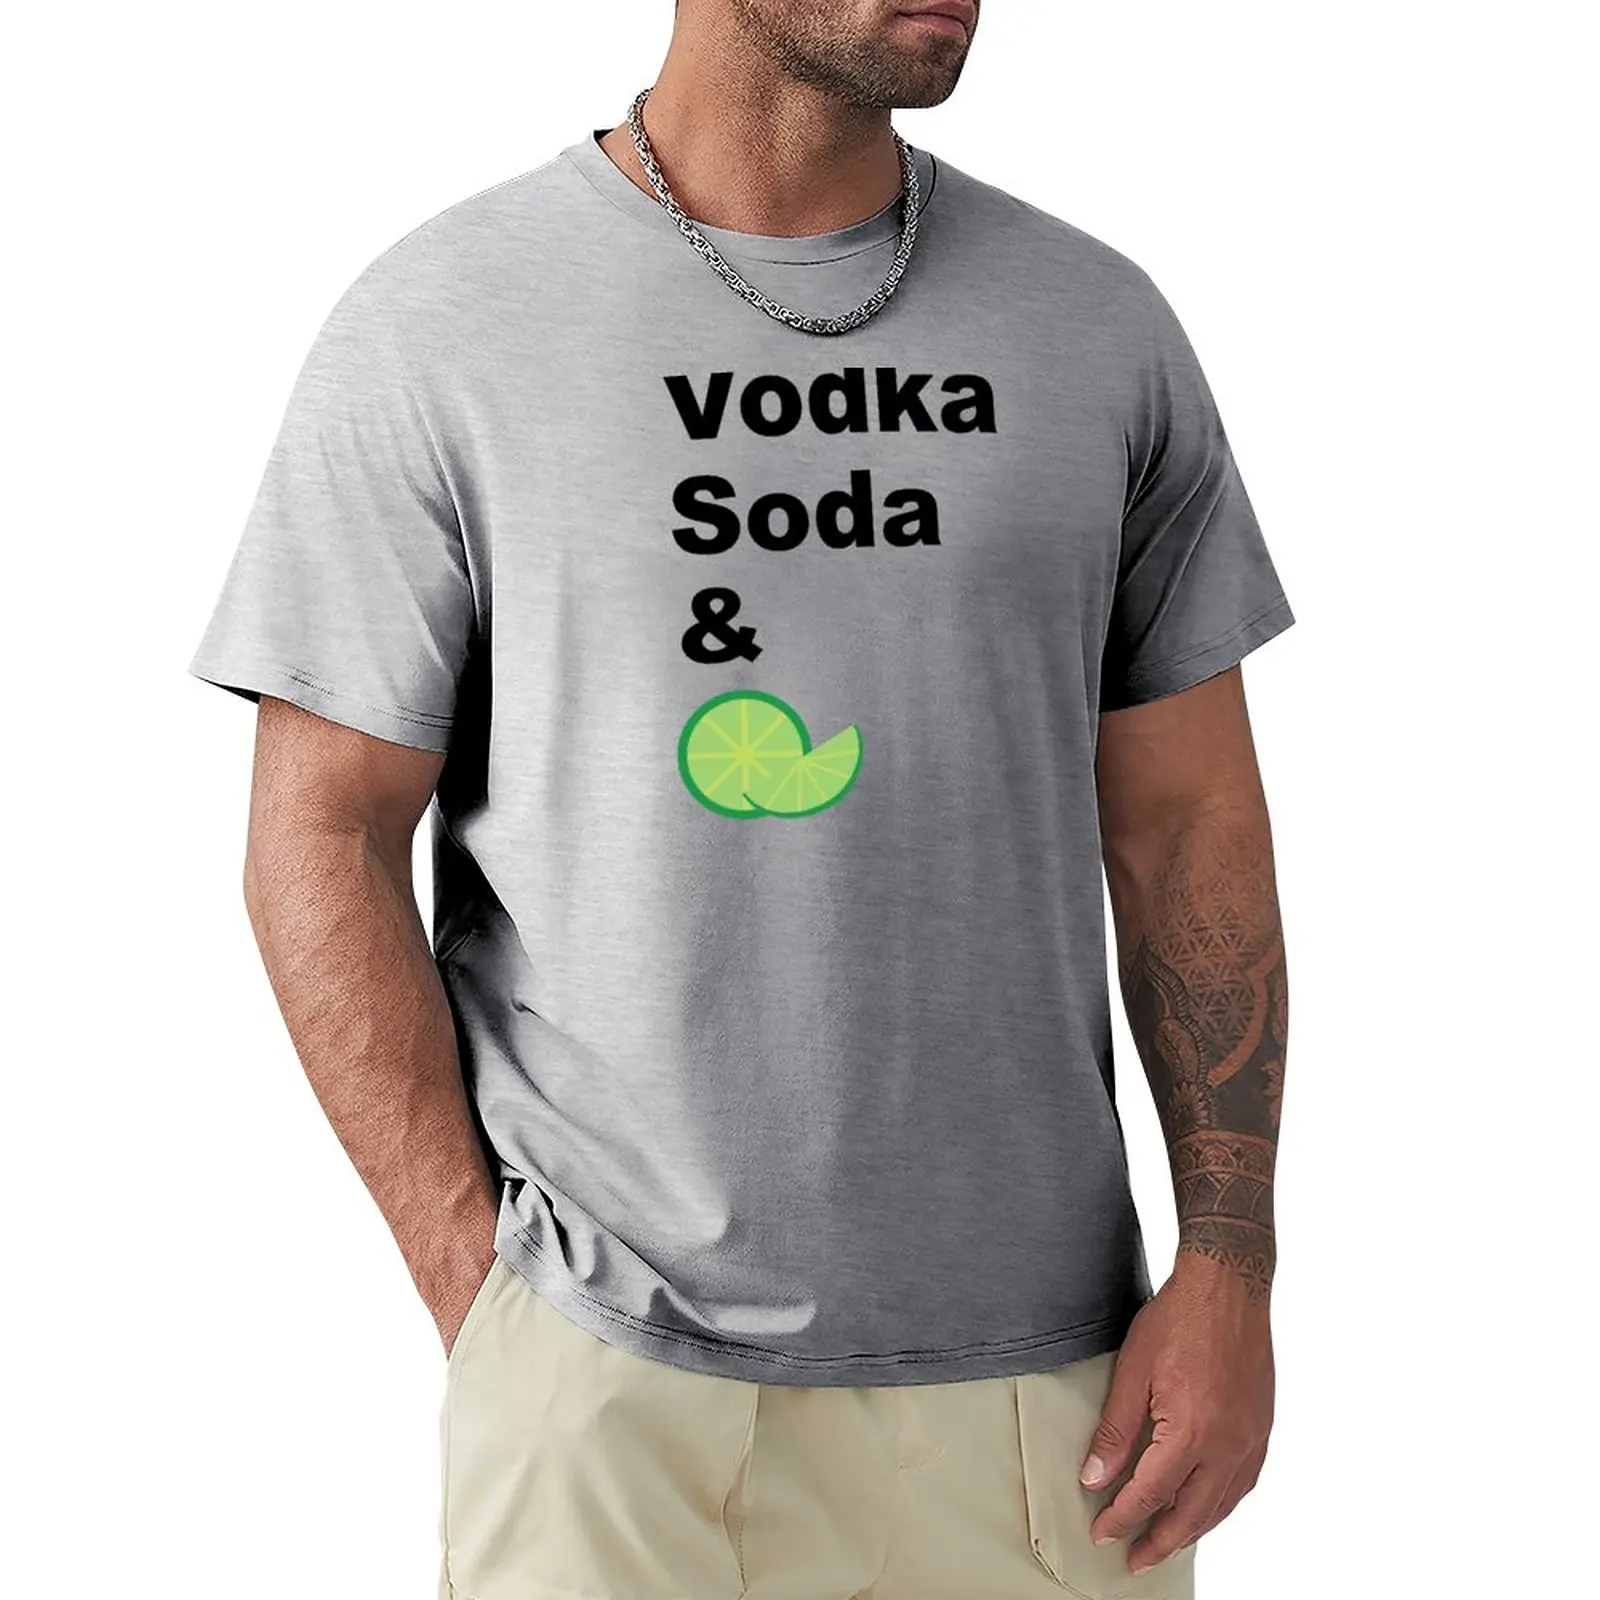 

Vodka Soda & Lime T-Shirt cute tops tees for a boy clothes for men